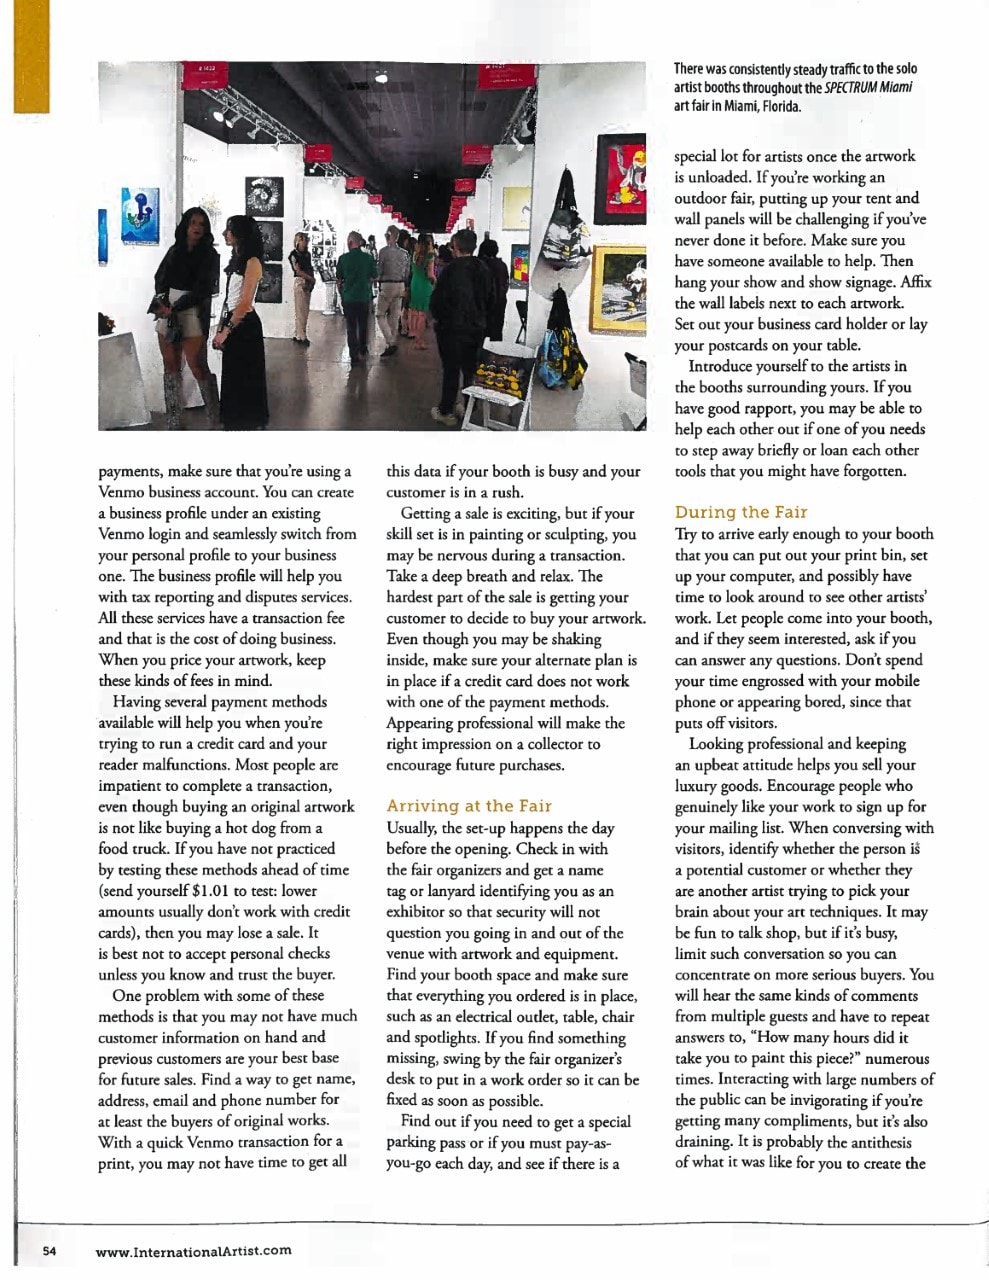 Page 5 of article on how to prepare for a successful art fair